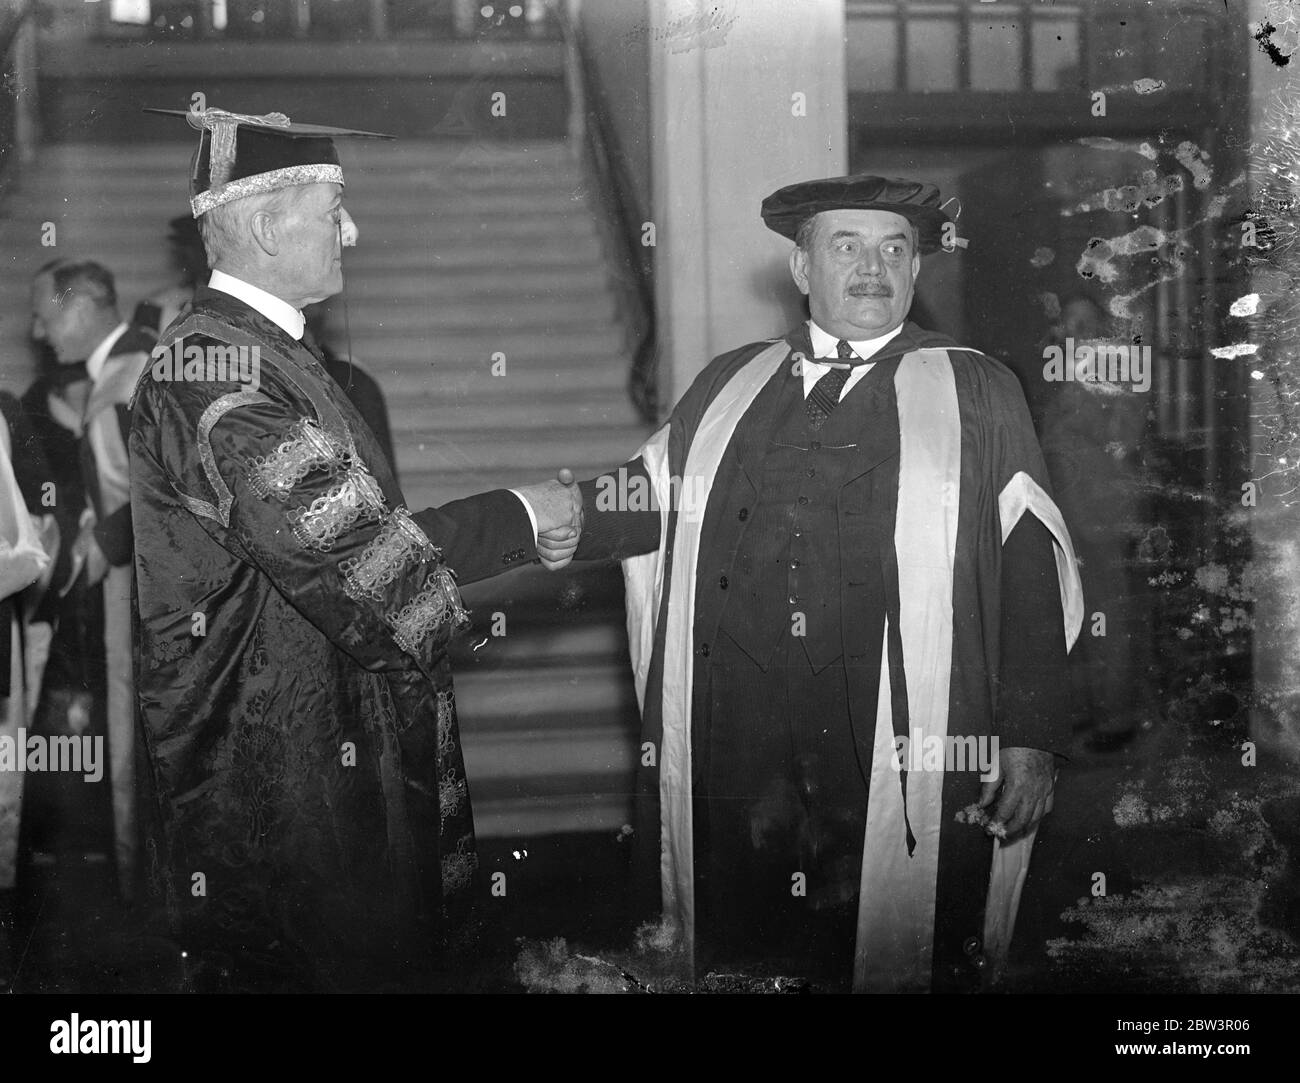 Sir Auster Chamberlain installed as Chancellor of Reading University . M Herriot recieves degree . Sir Austen Chamberlainwho was accompanied by M Herriot , Minister without Portclio in the French Cabinet and Viscout Hailshaw , the Lord Chancellor , was installed as Chancellor of Reading University . Viscount Hailsham , Sir Austen , and M Merriot received the honorary degree of Doctor of Letters . Photo shows , Sir Austen Chamberlain congratulated by M Herriot at the ceremony . 2 December 1935 Stock Photo